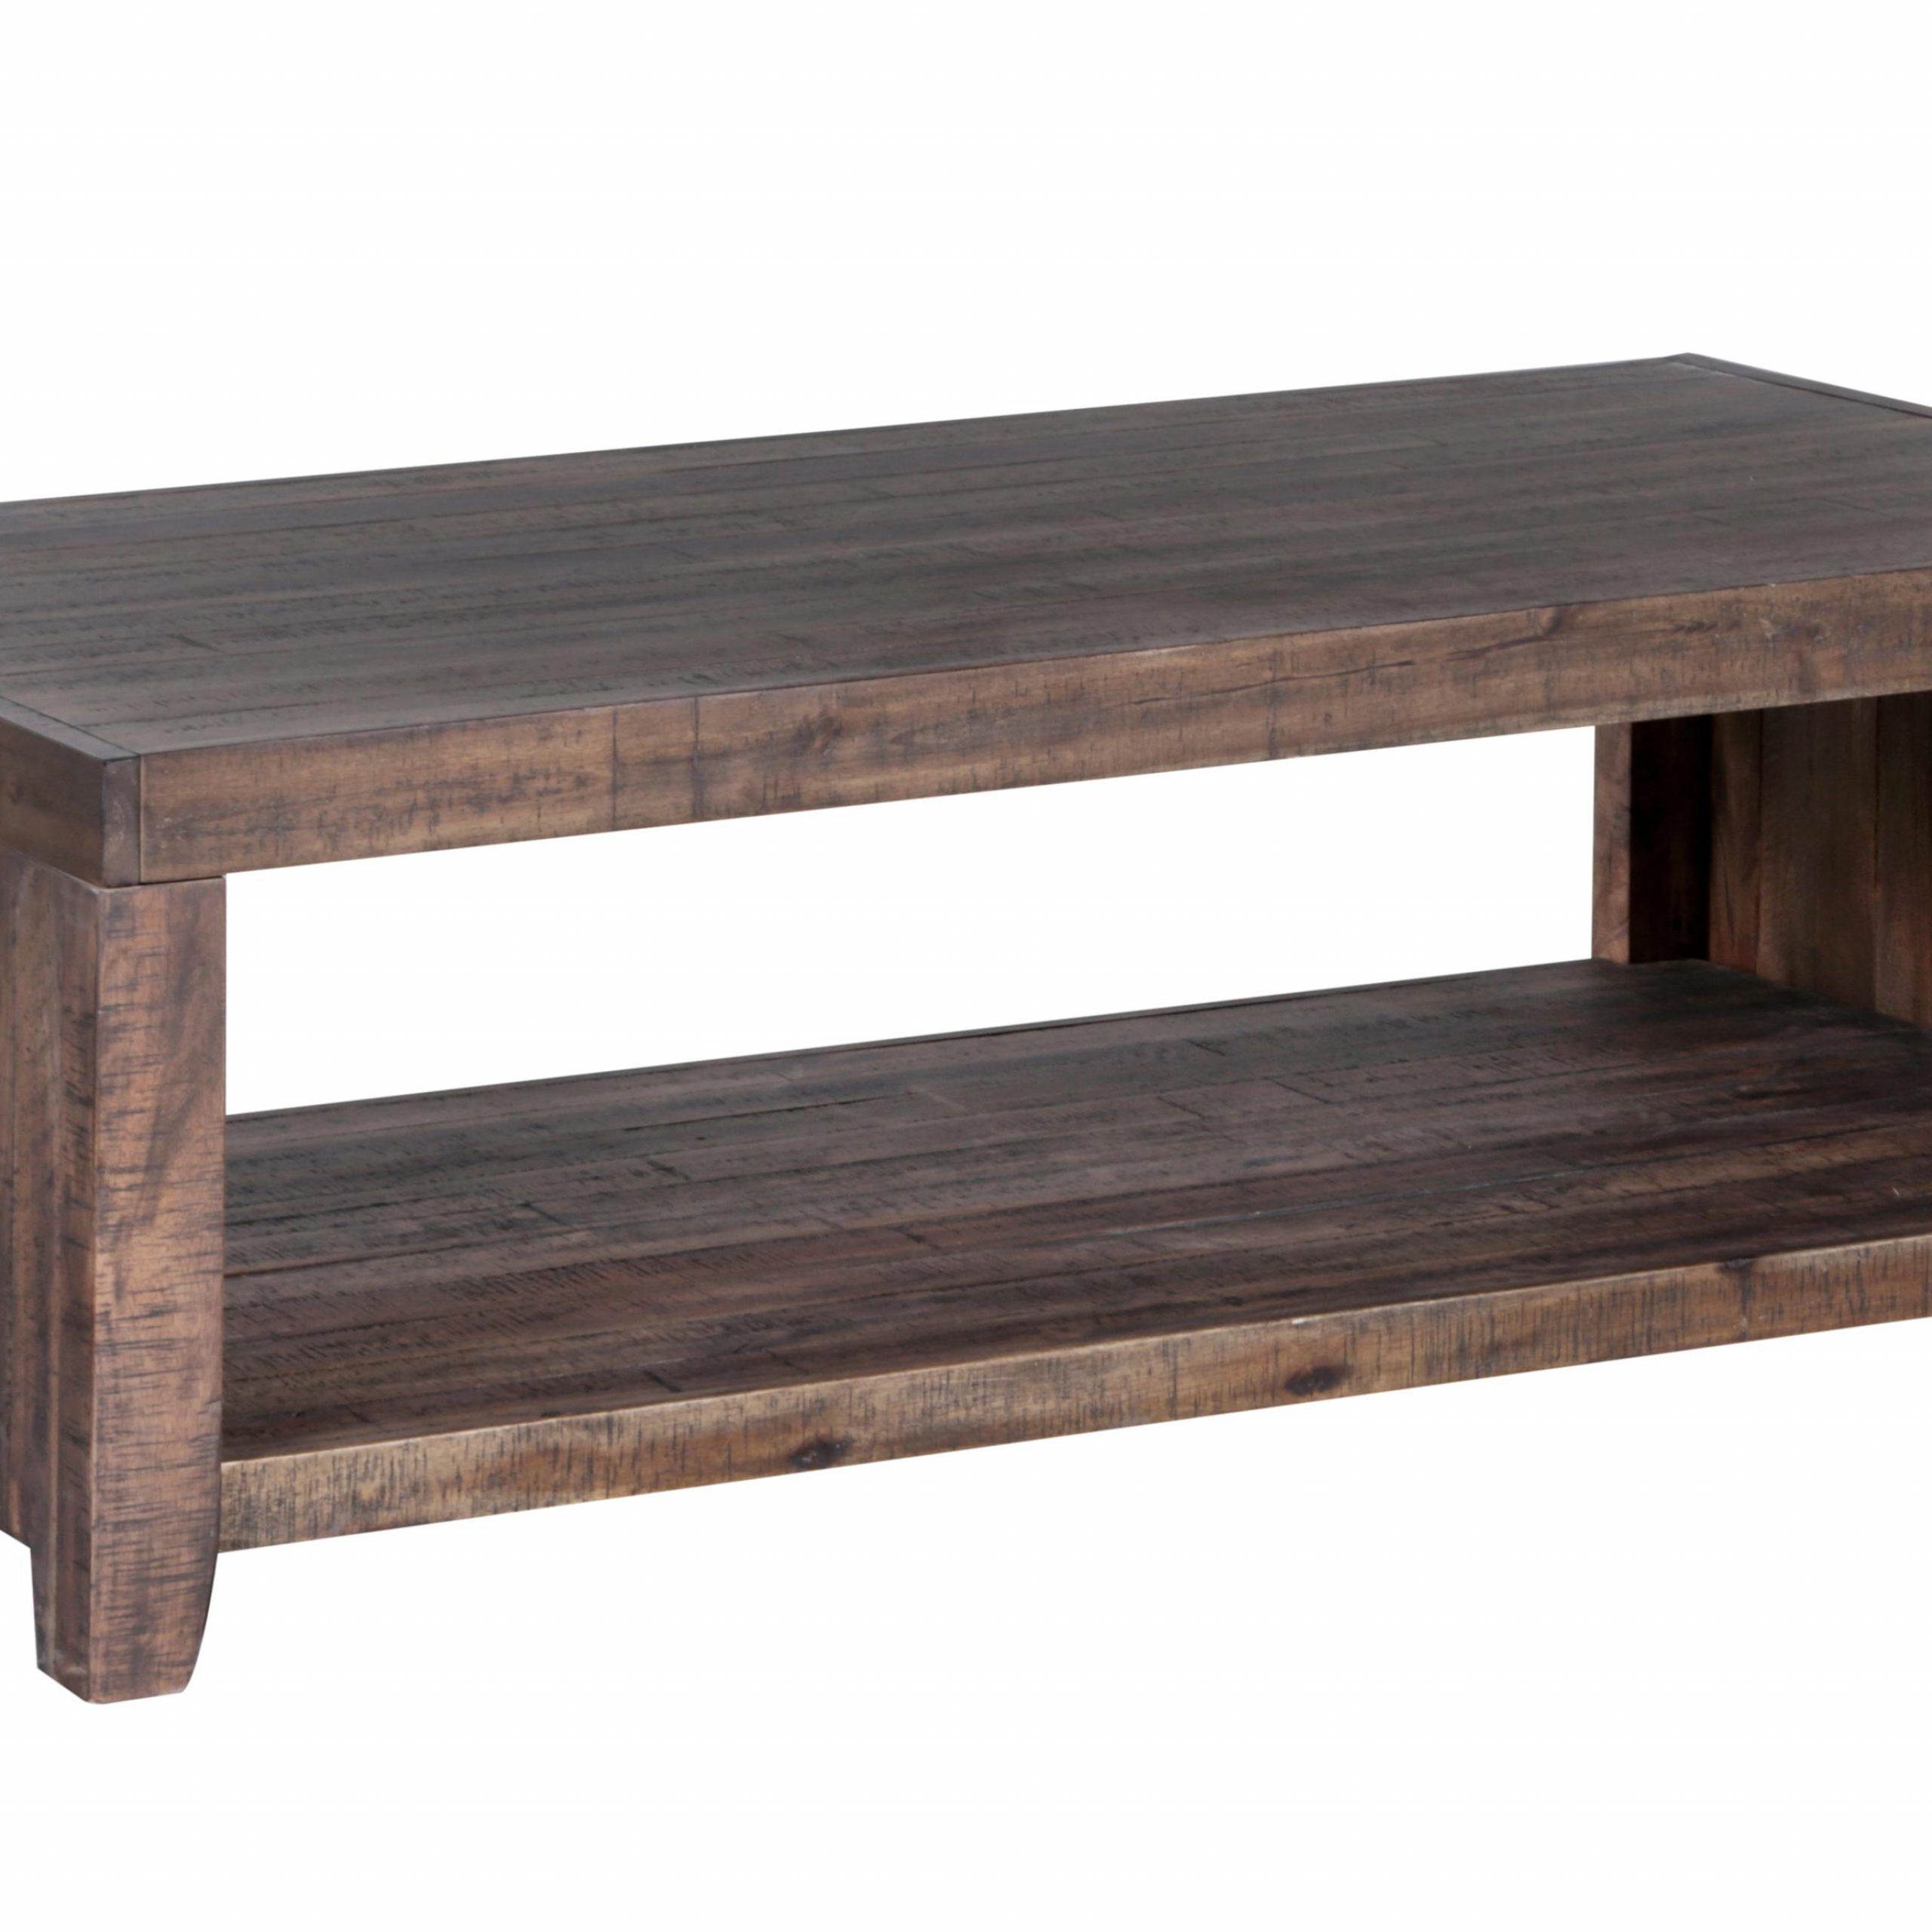 Preferred Magnussen Home Caitlyn Rustic Rectangular Cocktail Table Regarding Rustic Barnside Cocktail Tables (View 15 of 20)